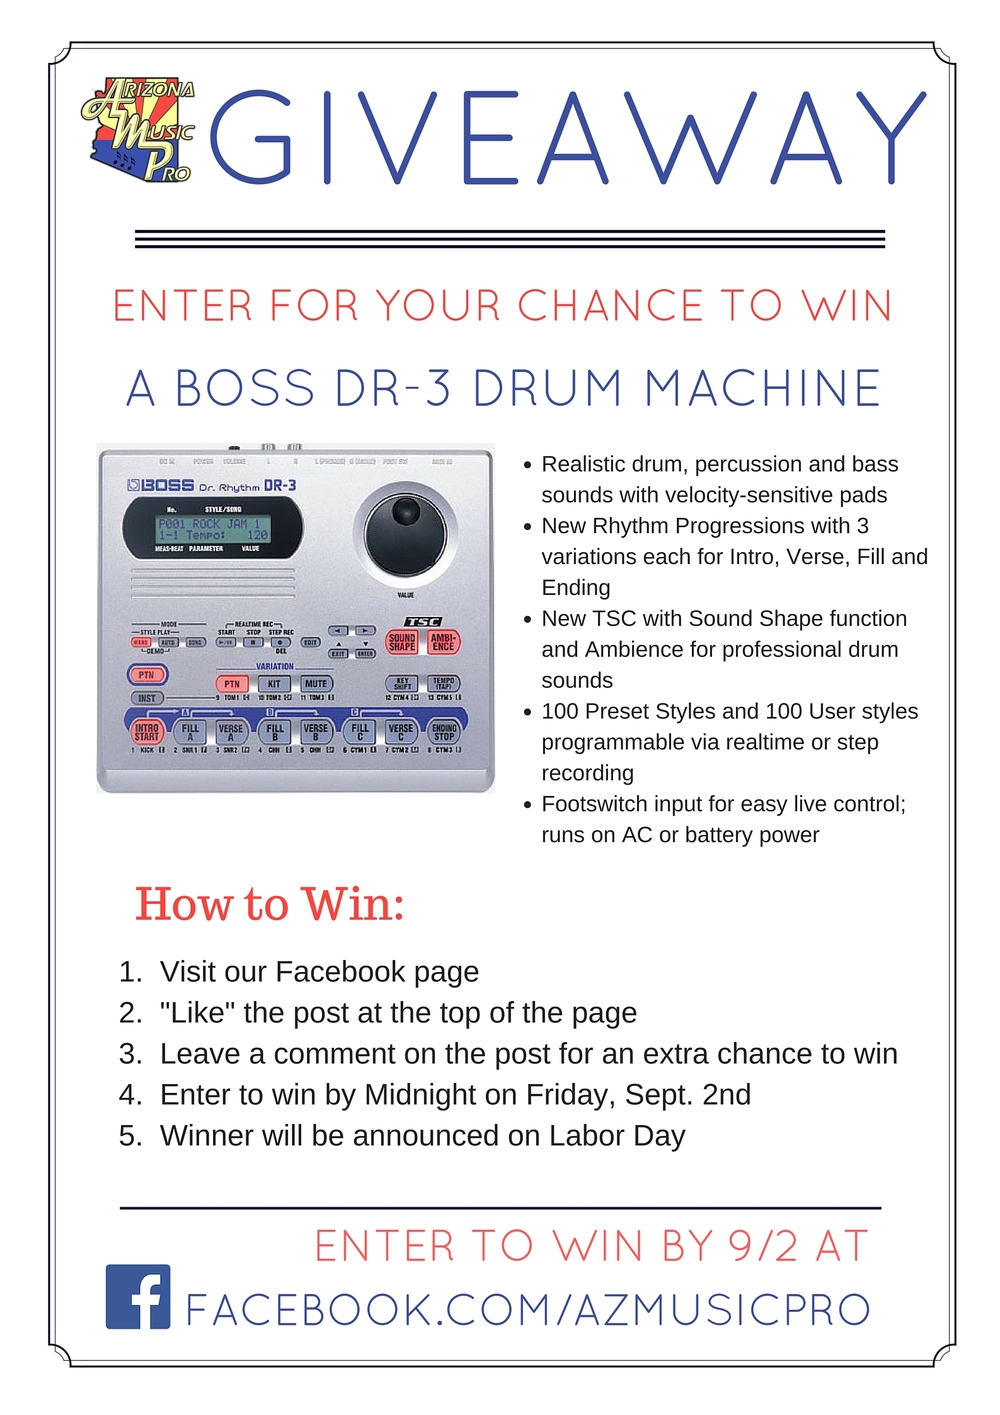 We Are Giving Away a BOSS DR-3 Drum Machine! — Arizona Music Pro